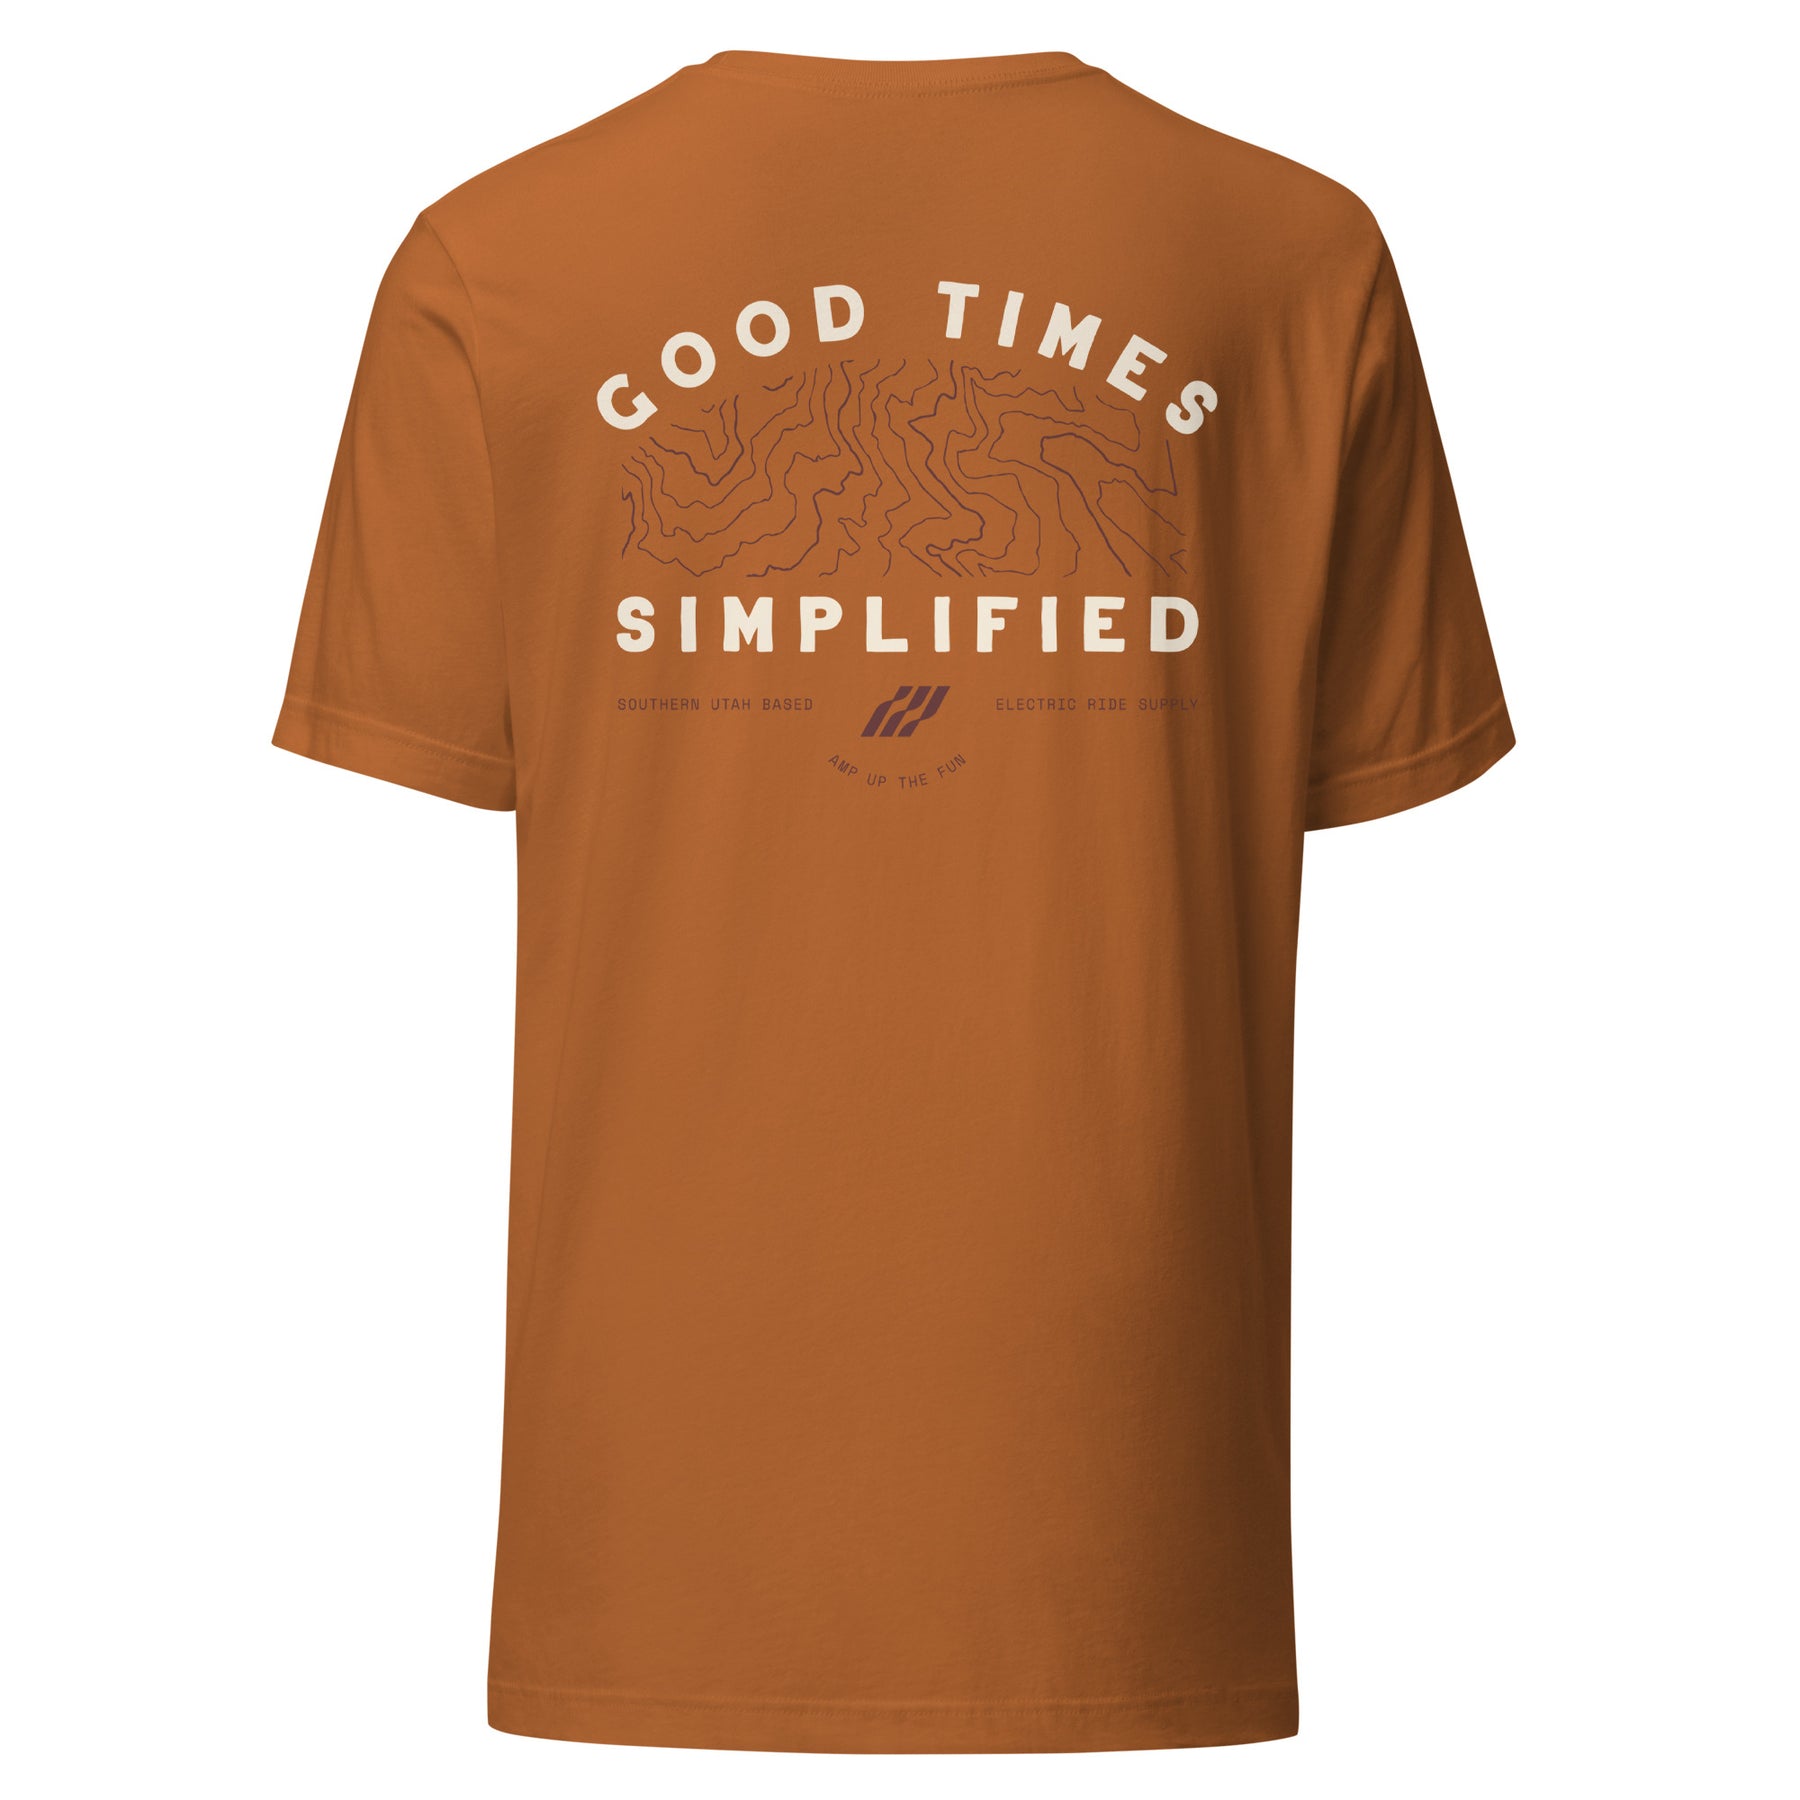 The Good Times Simplified Tee 1